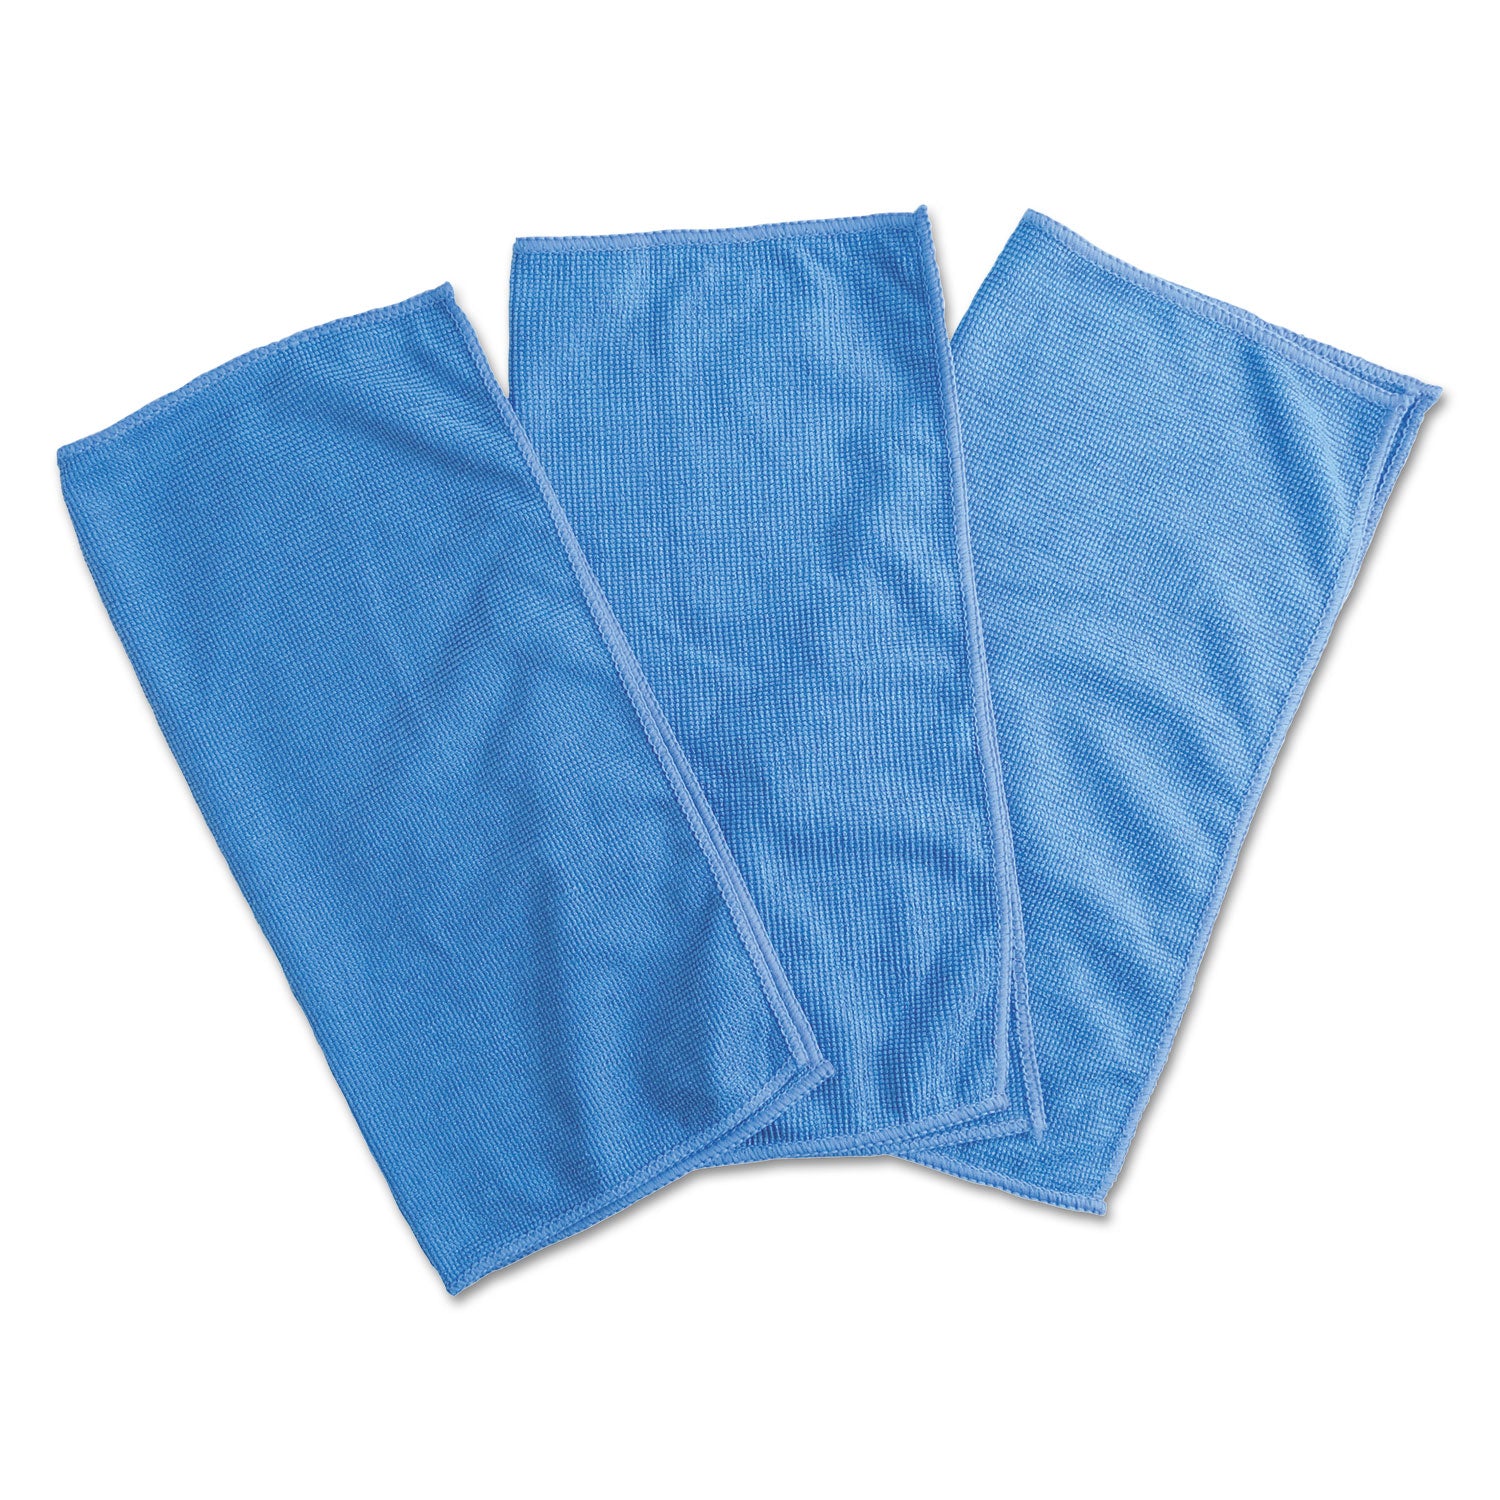 microfiber-cleaning-cloth-12-x-12-blue-3-pack_unv43664 - 4